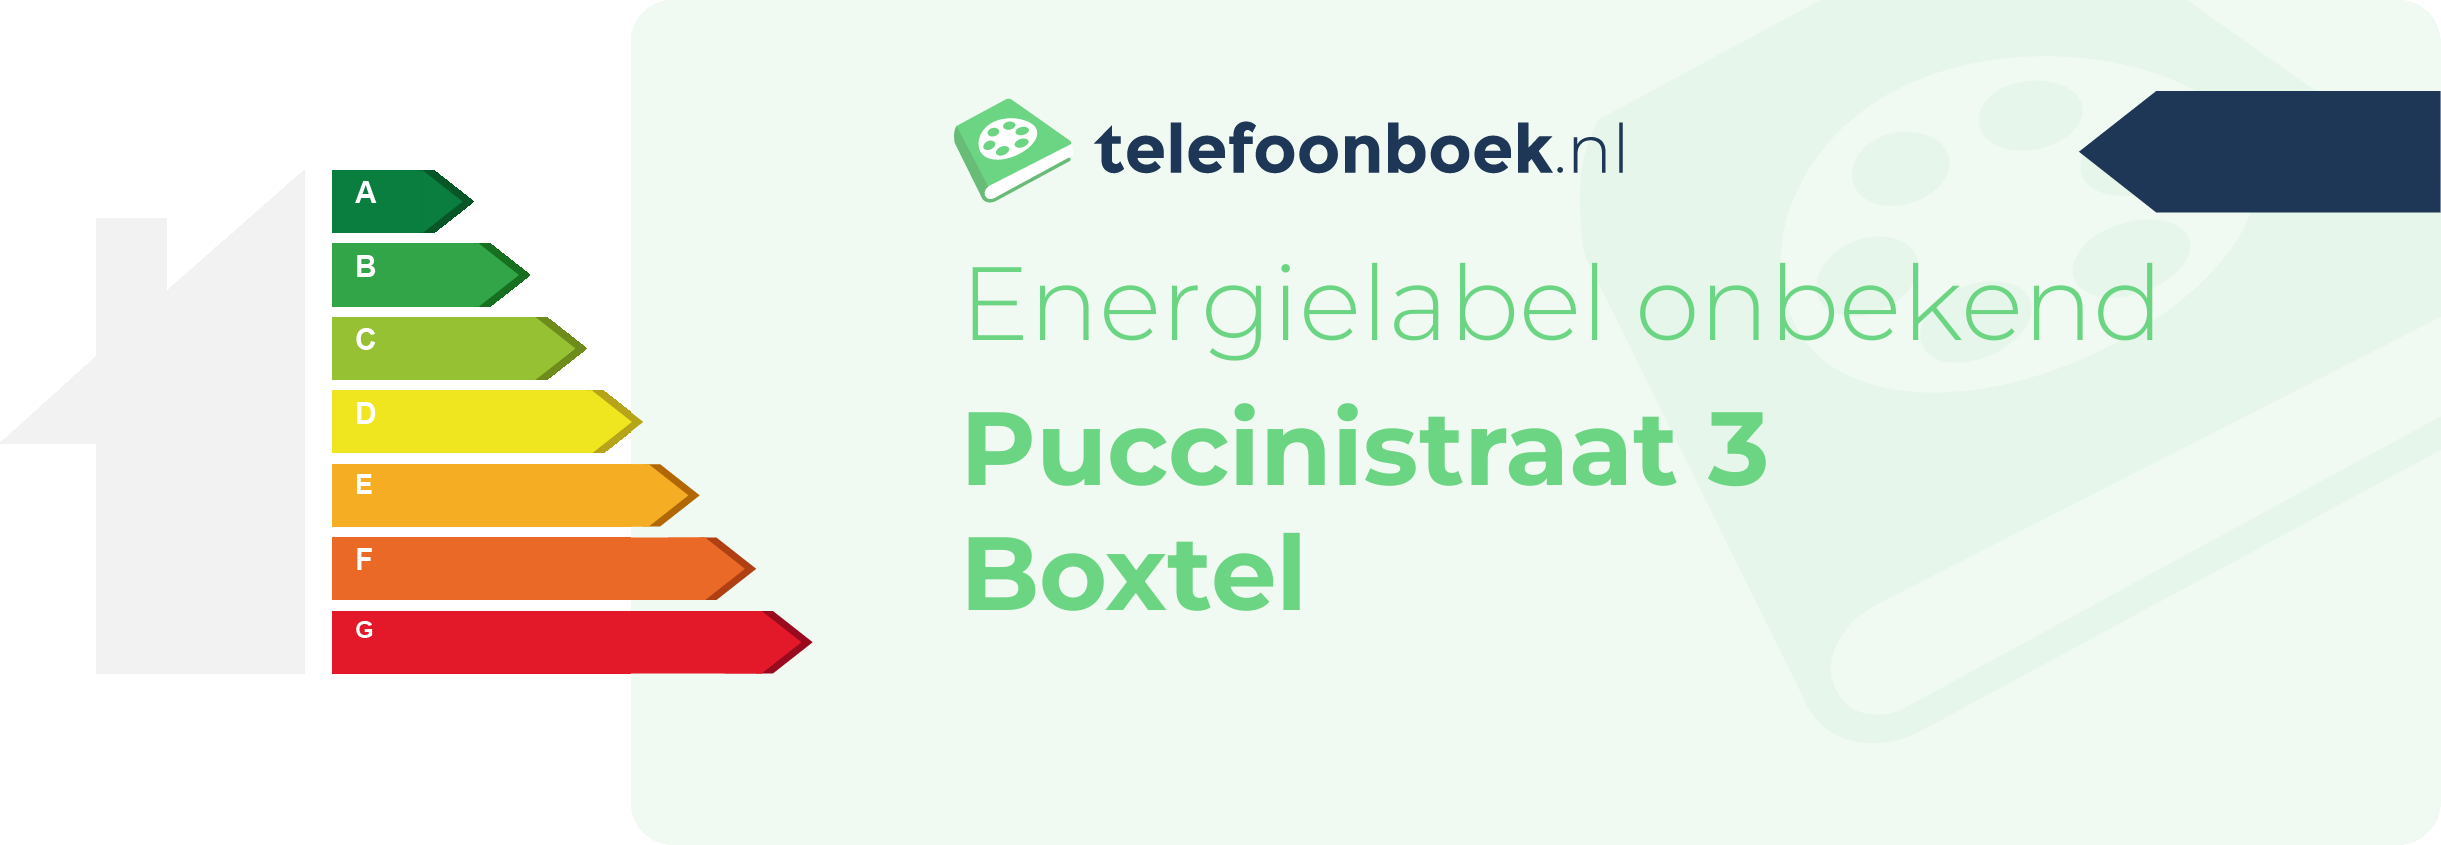 Energielabel Puccinistraat 3 Boxtel